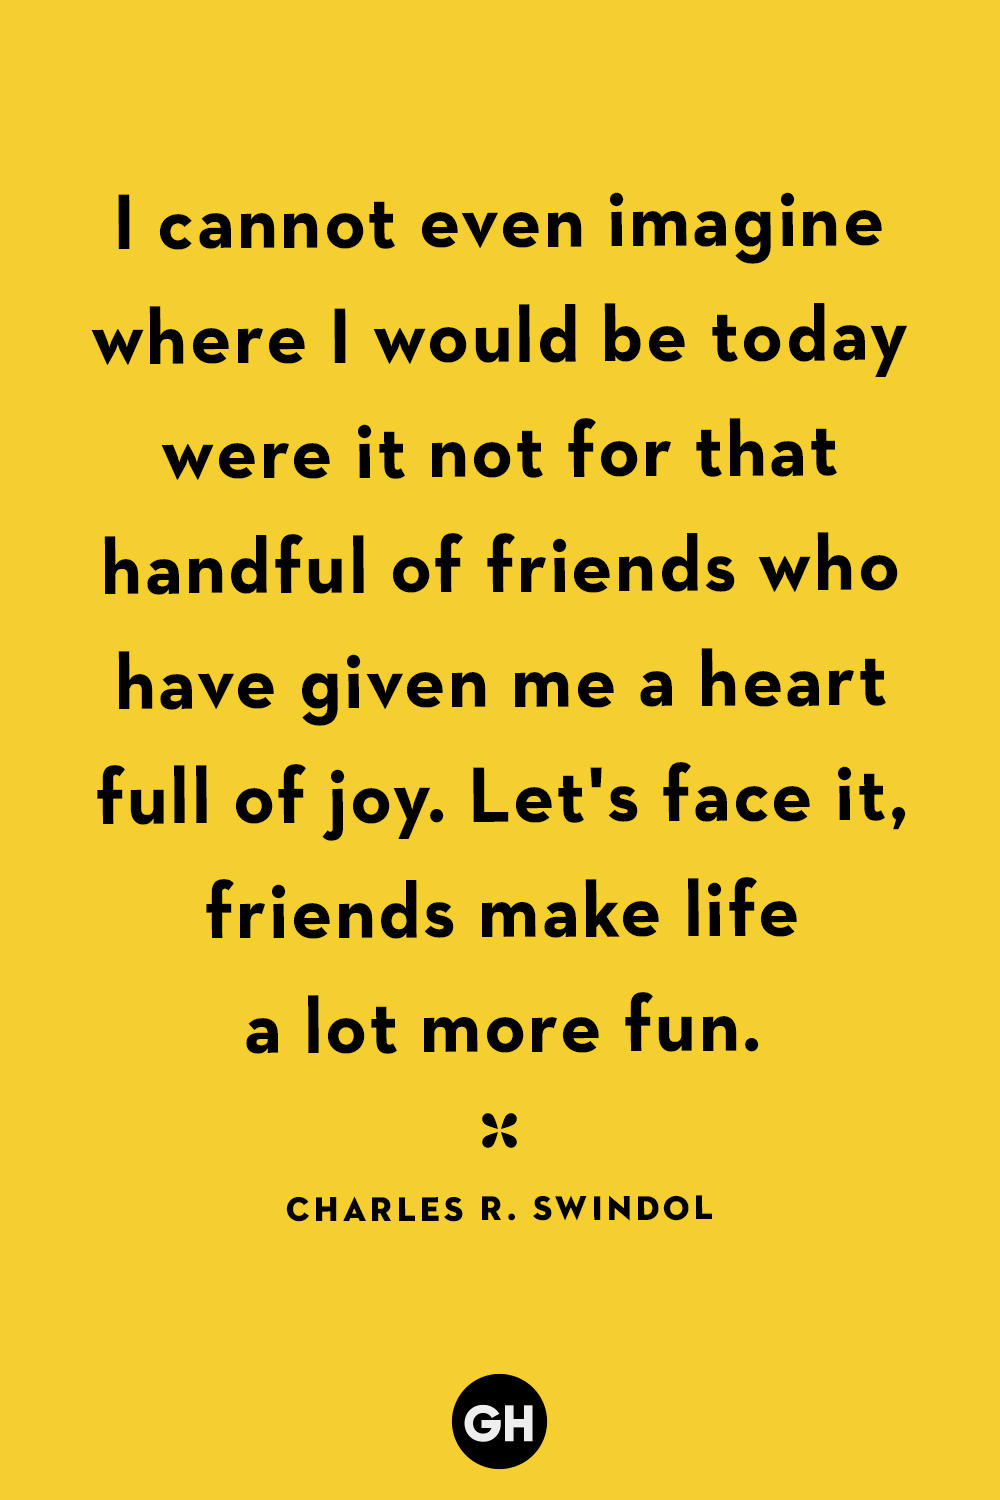 69 Best Friendship Quotes Meaningful Sayings About True Friends